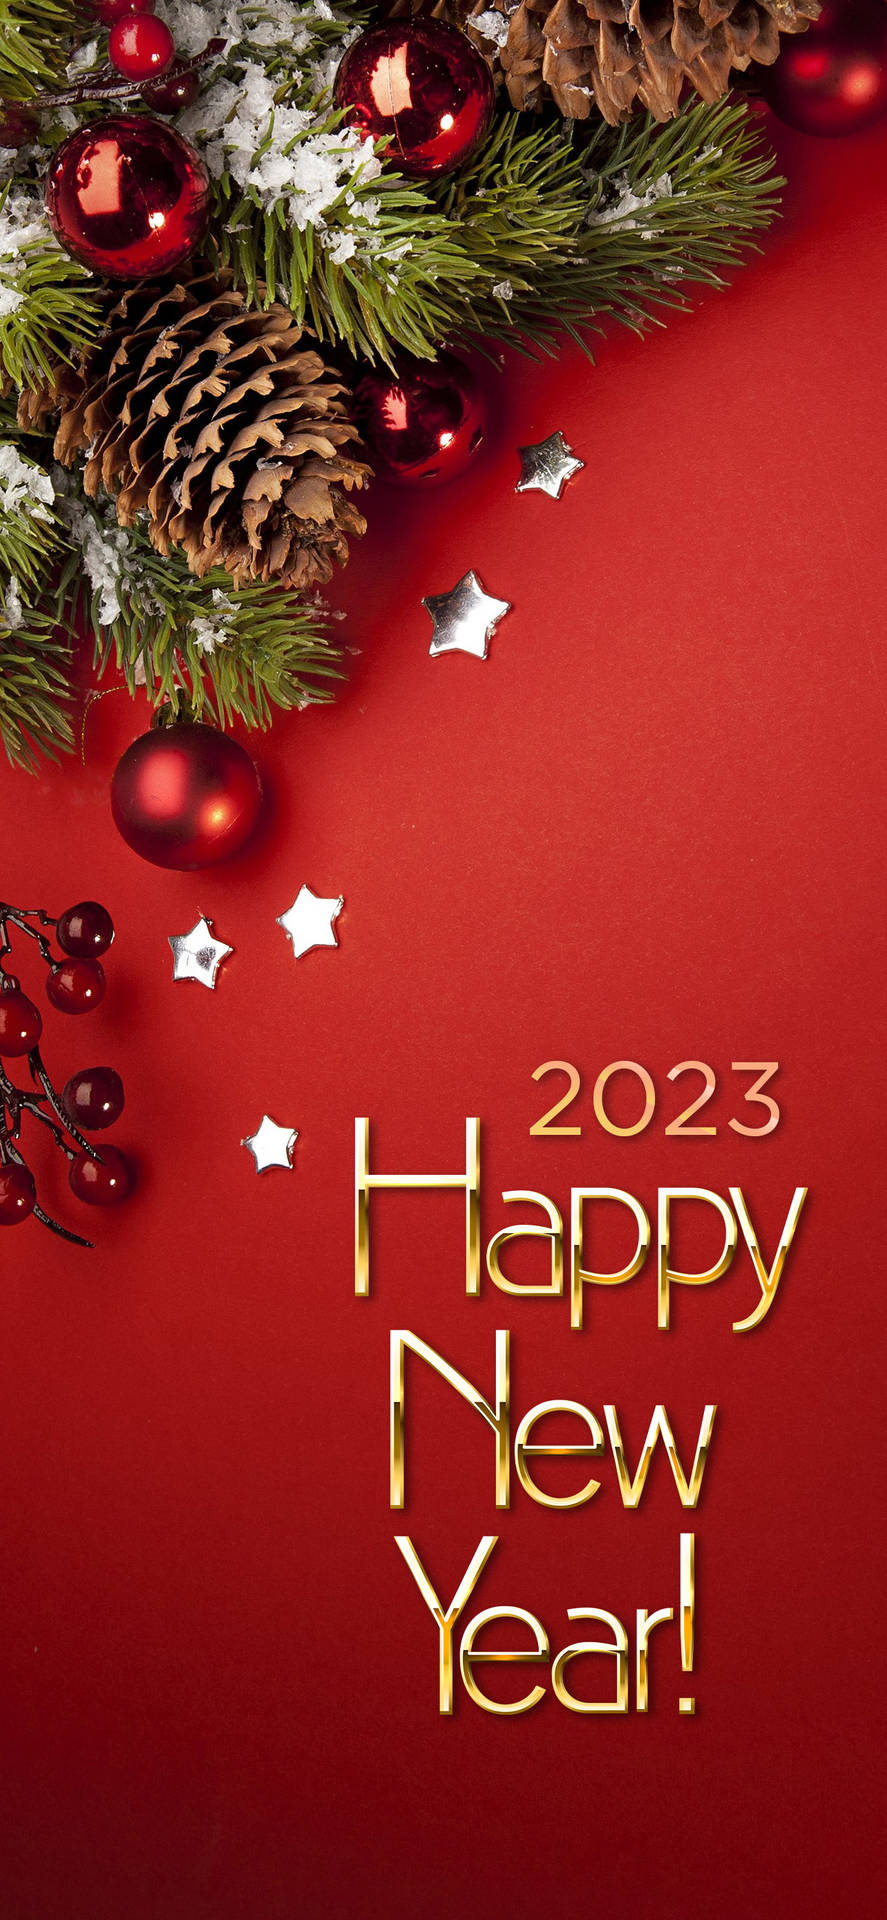 Download Red Aesthetic Happy New Year 2023 Wallpaper | Wallpapers.com